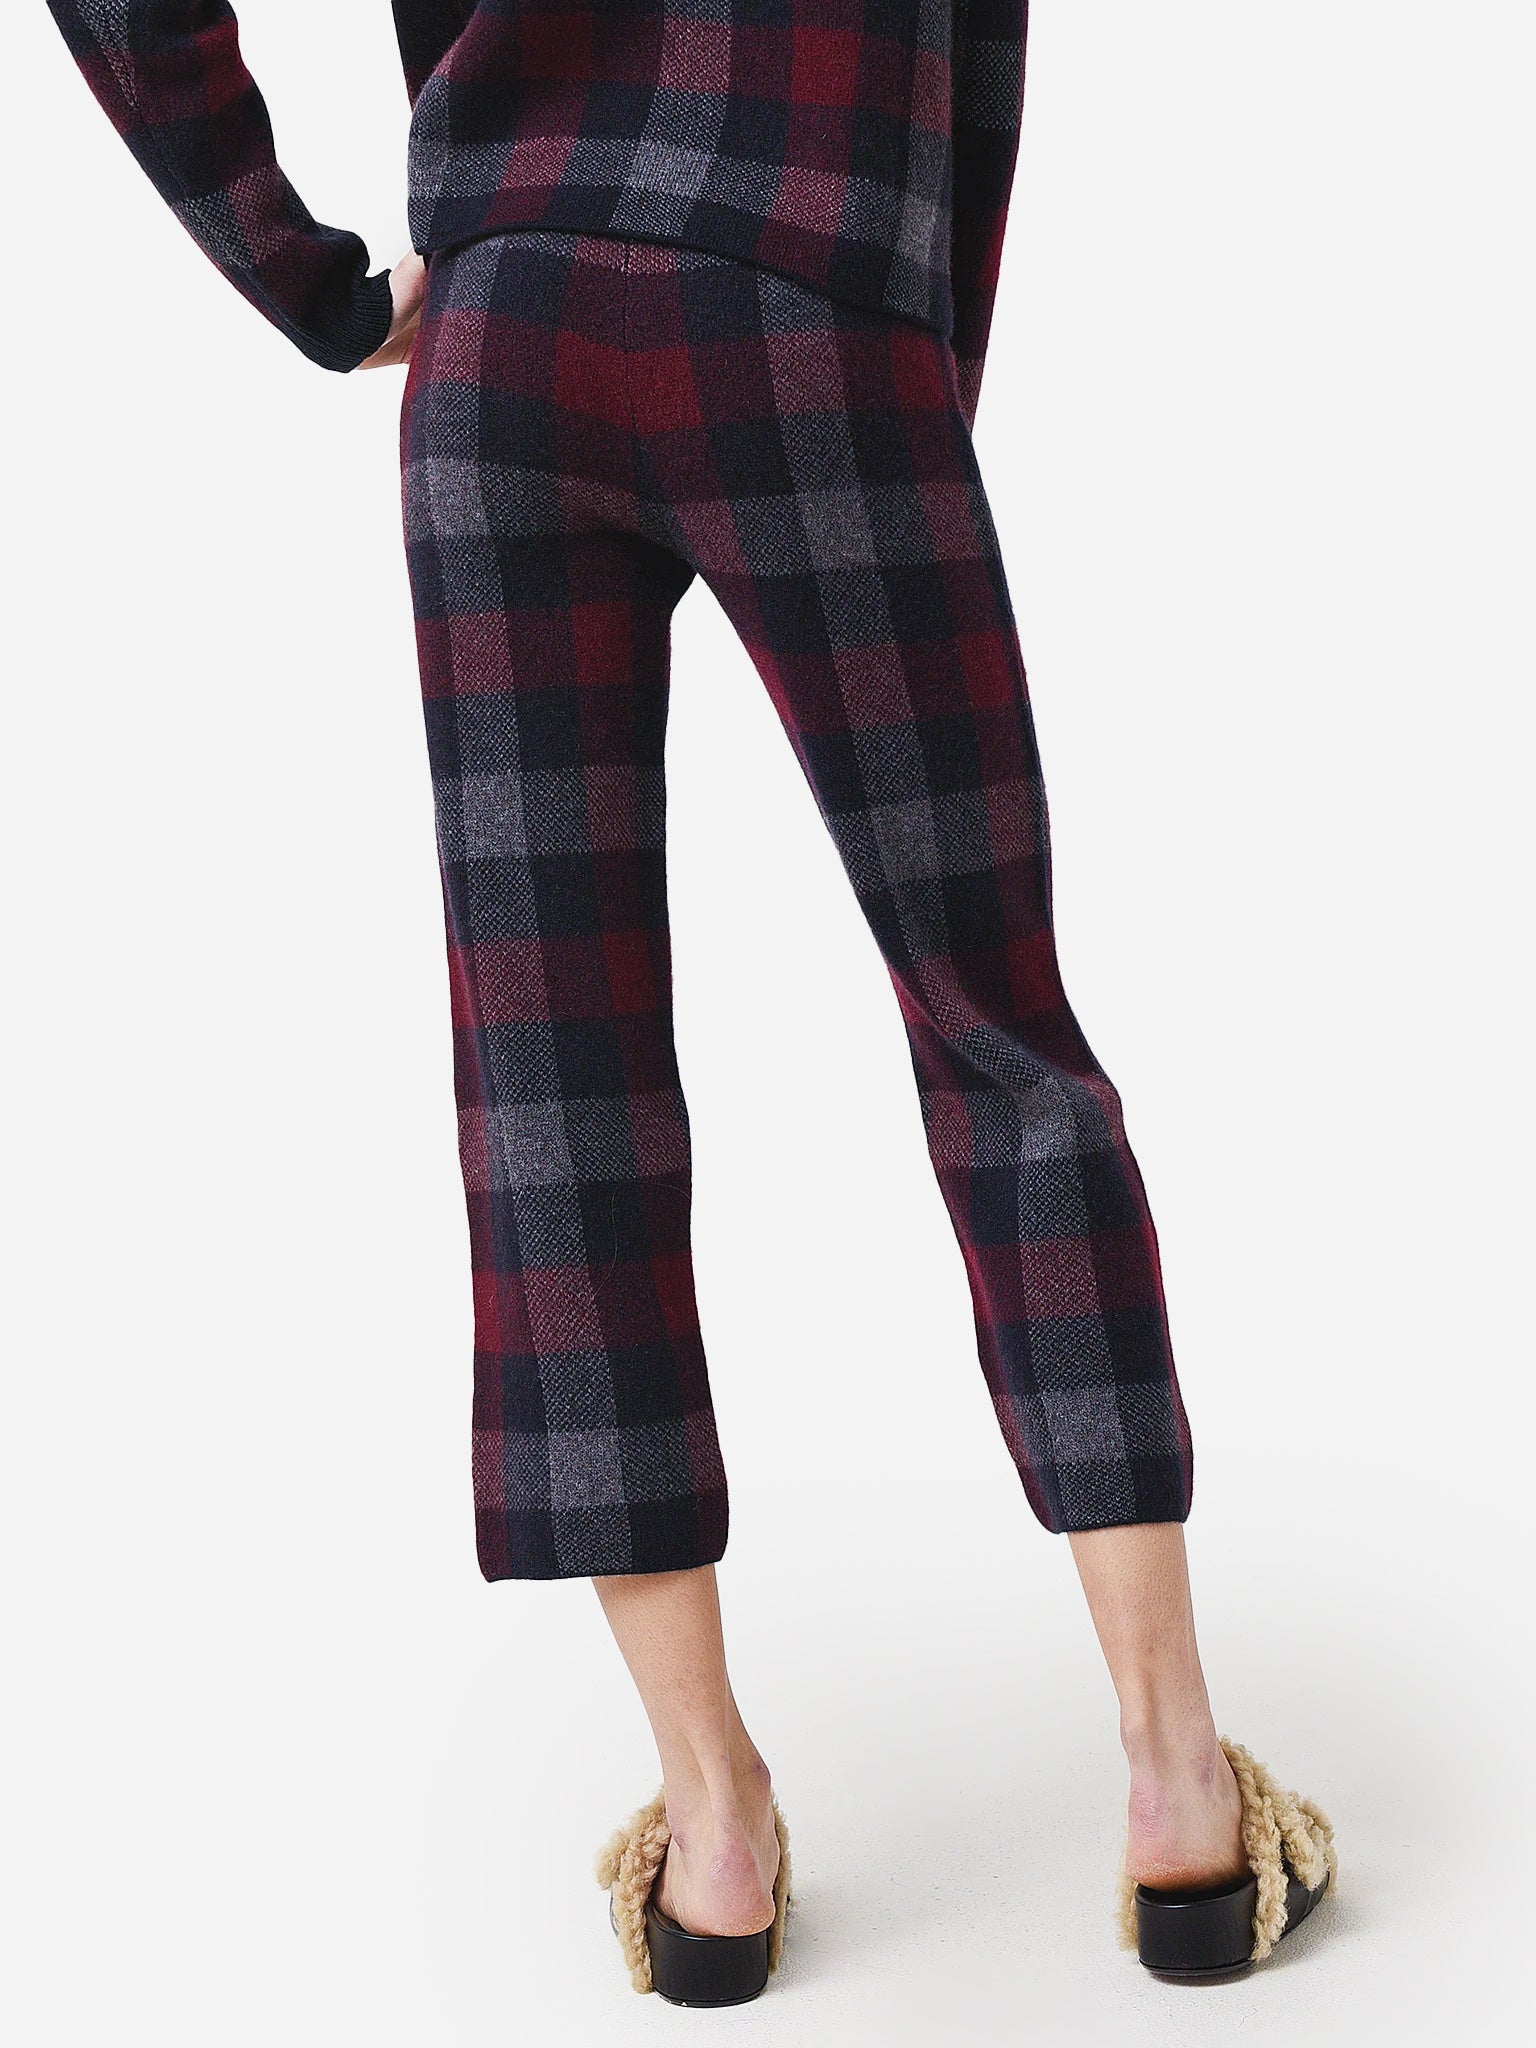 Red Plaid Pants, Wedge Sneakers. - The Hunter Collector